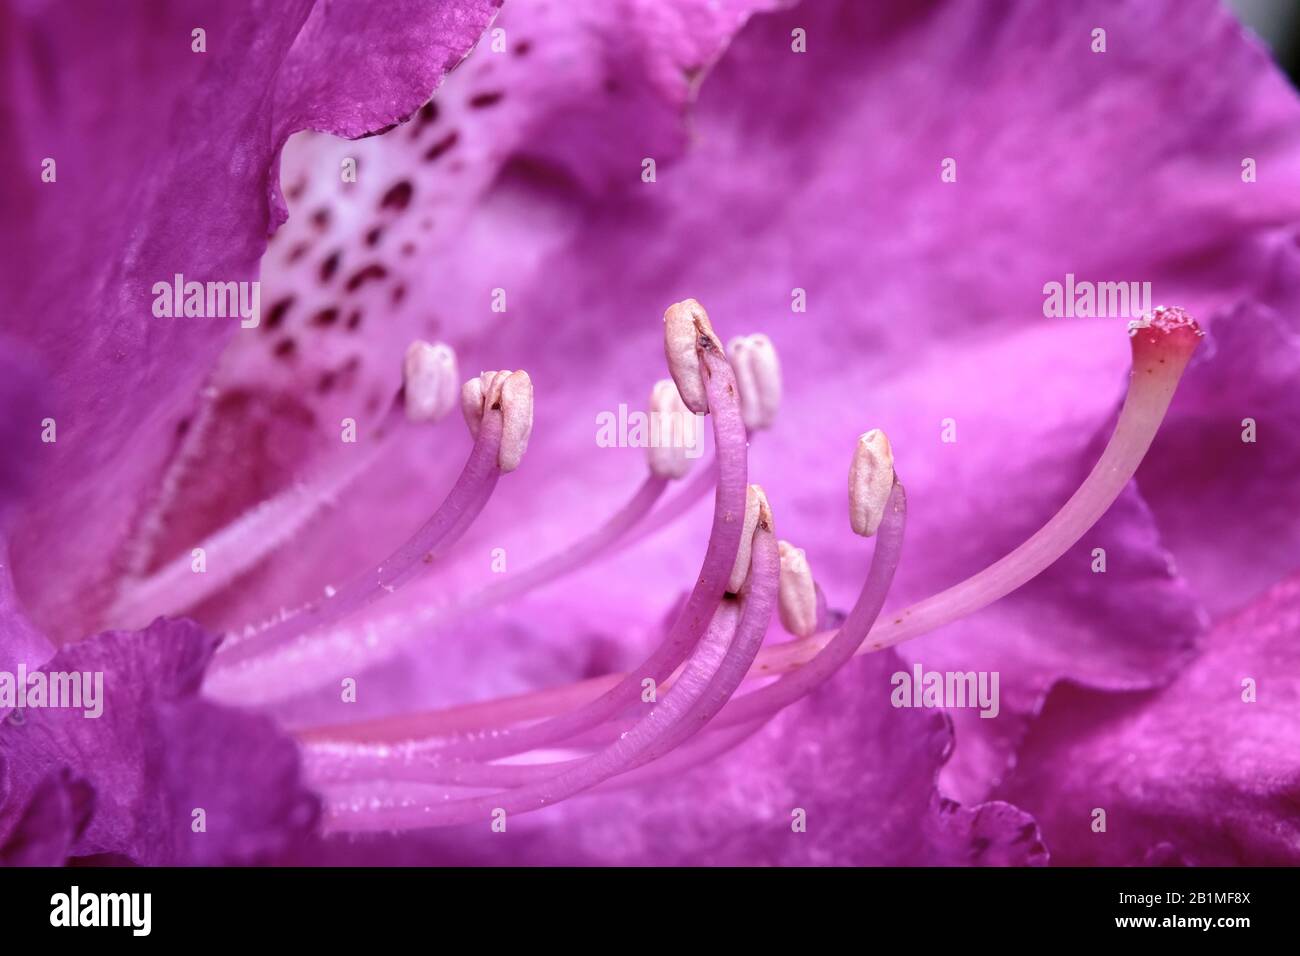 A close-up view inside a pink rhododendron blossom, with its prominent stamens, anthers and stigma (the reproductive organs of a flowering plant). Stock Photo